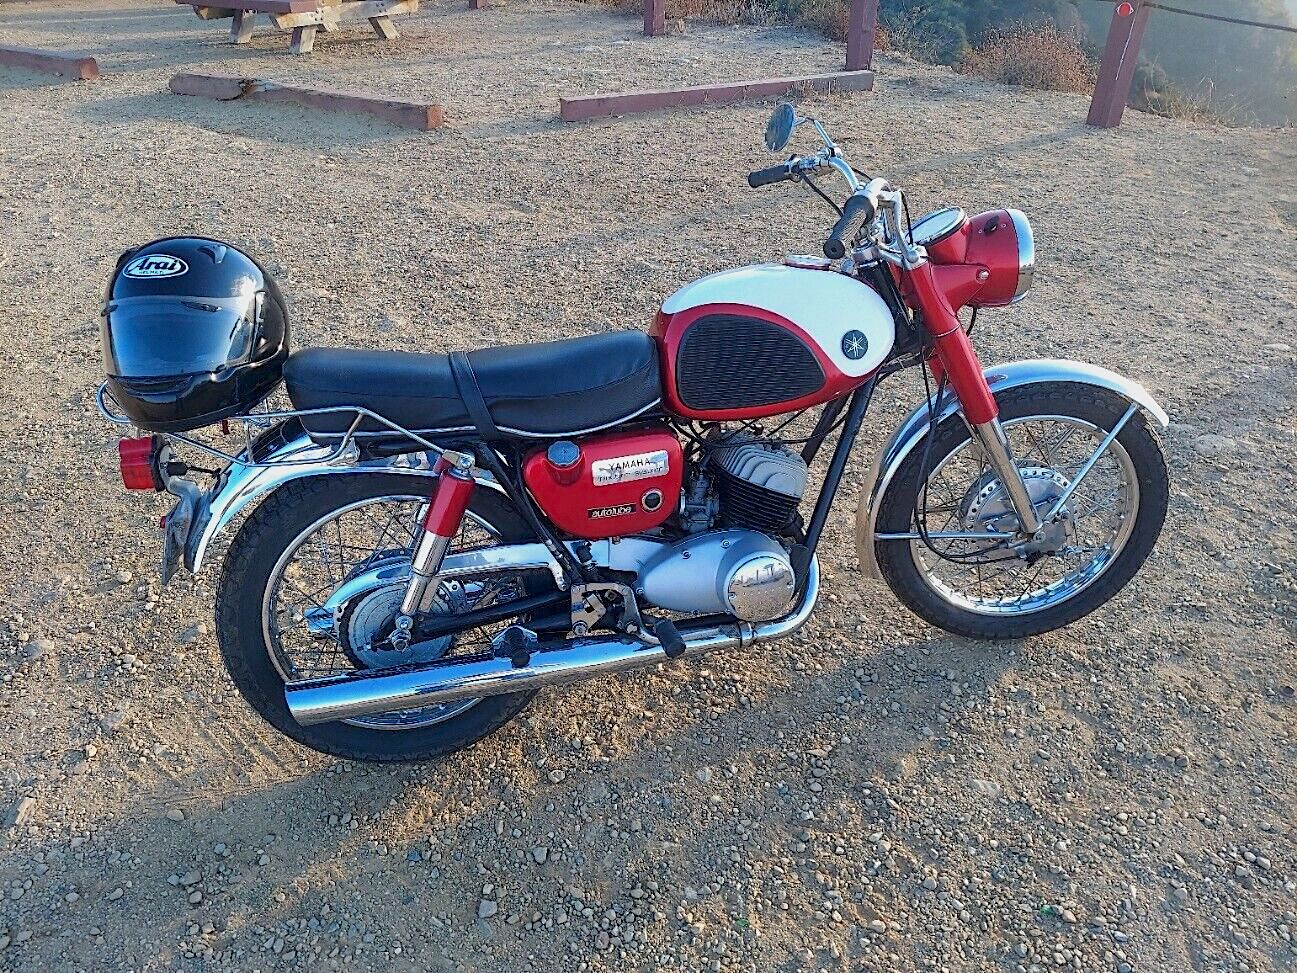 Yamaha Motorcycles Started in the US With This Two-Stroke Gem - eBay Motors  Blog